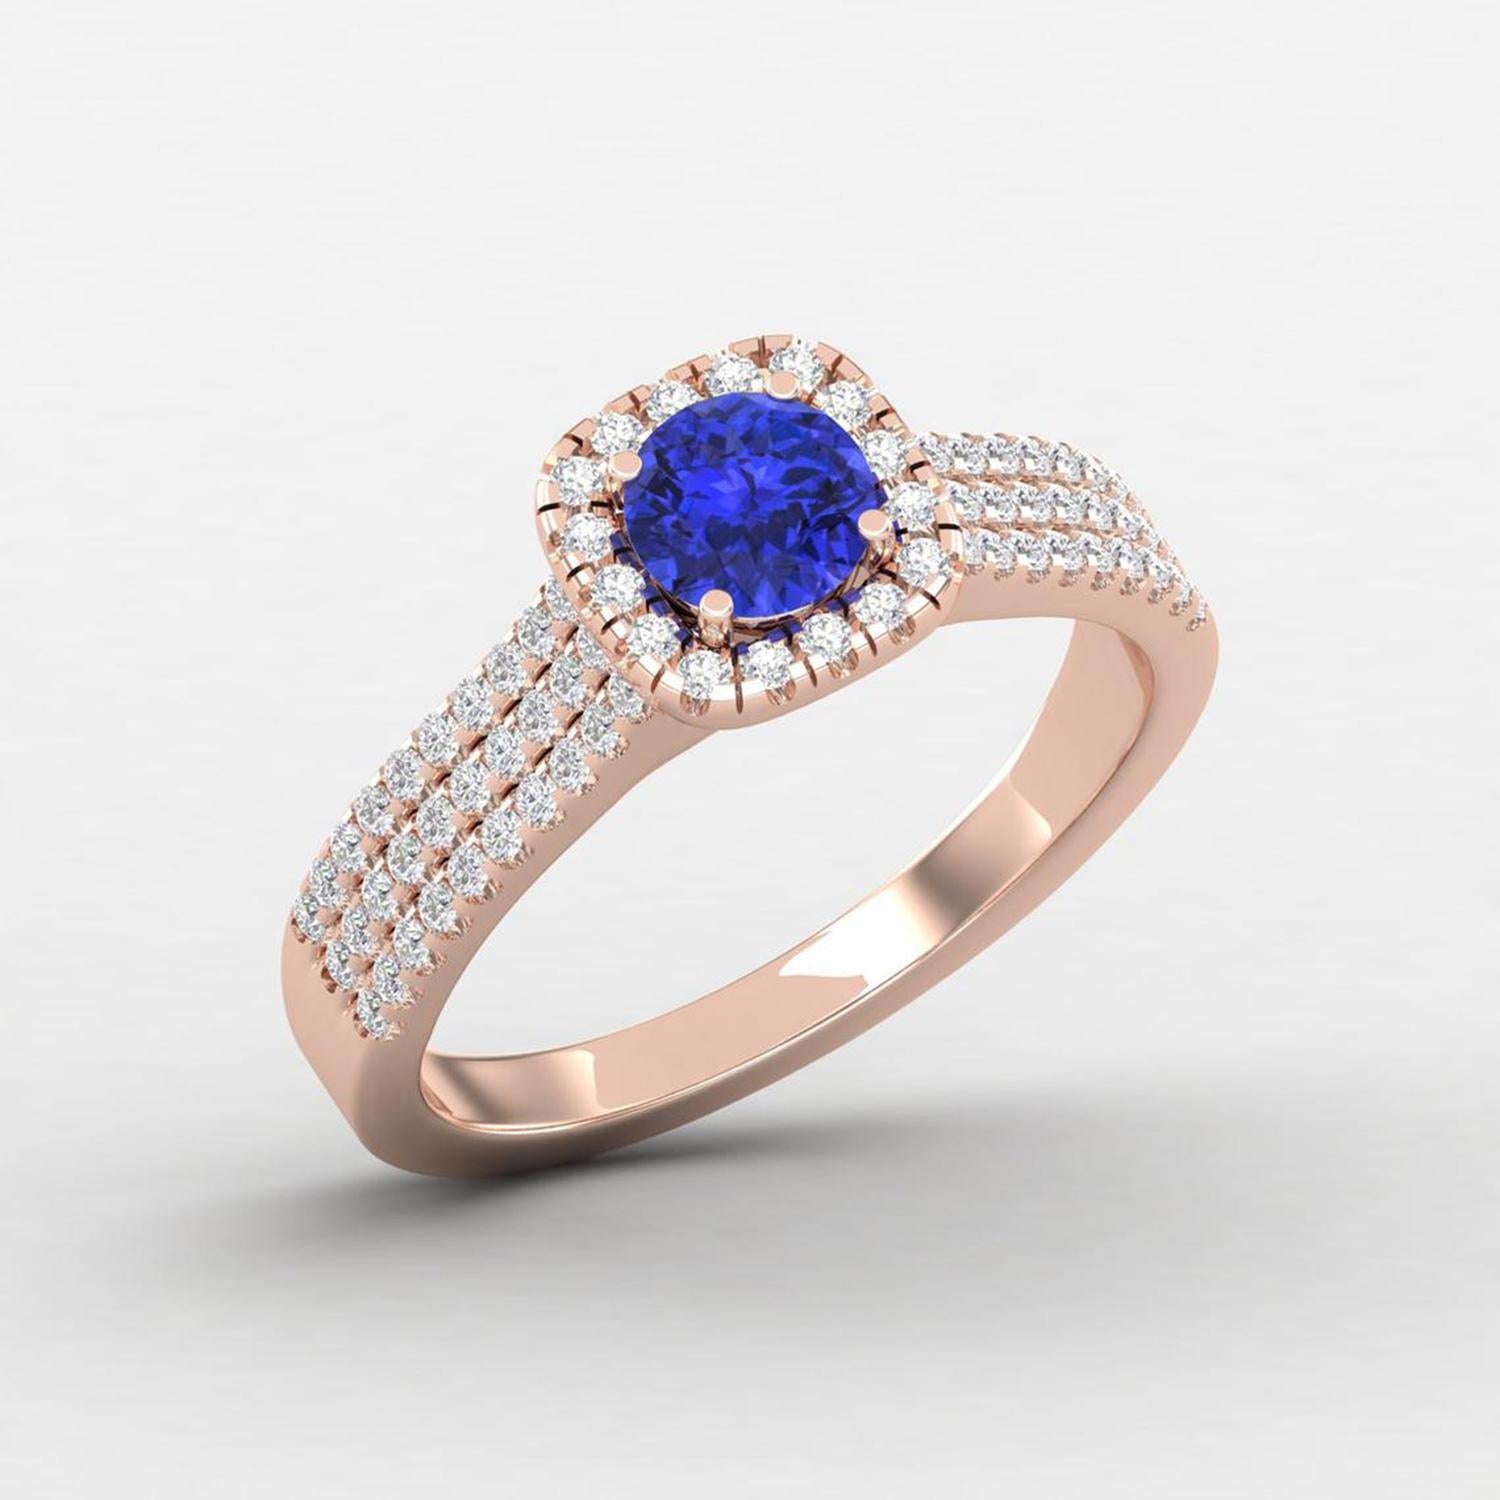 Round Cut 14 Karat Gold Tanzanite Ring / Diamond Solitaire Ring / Ring for Her For Sale